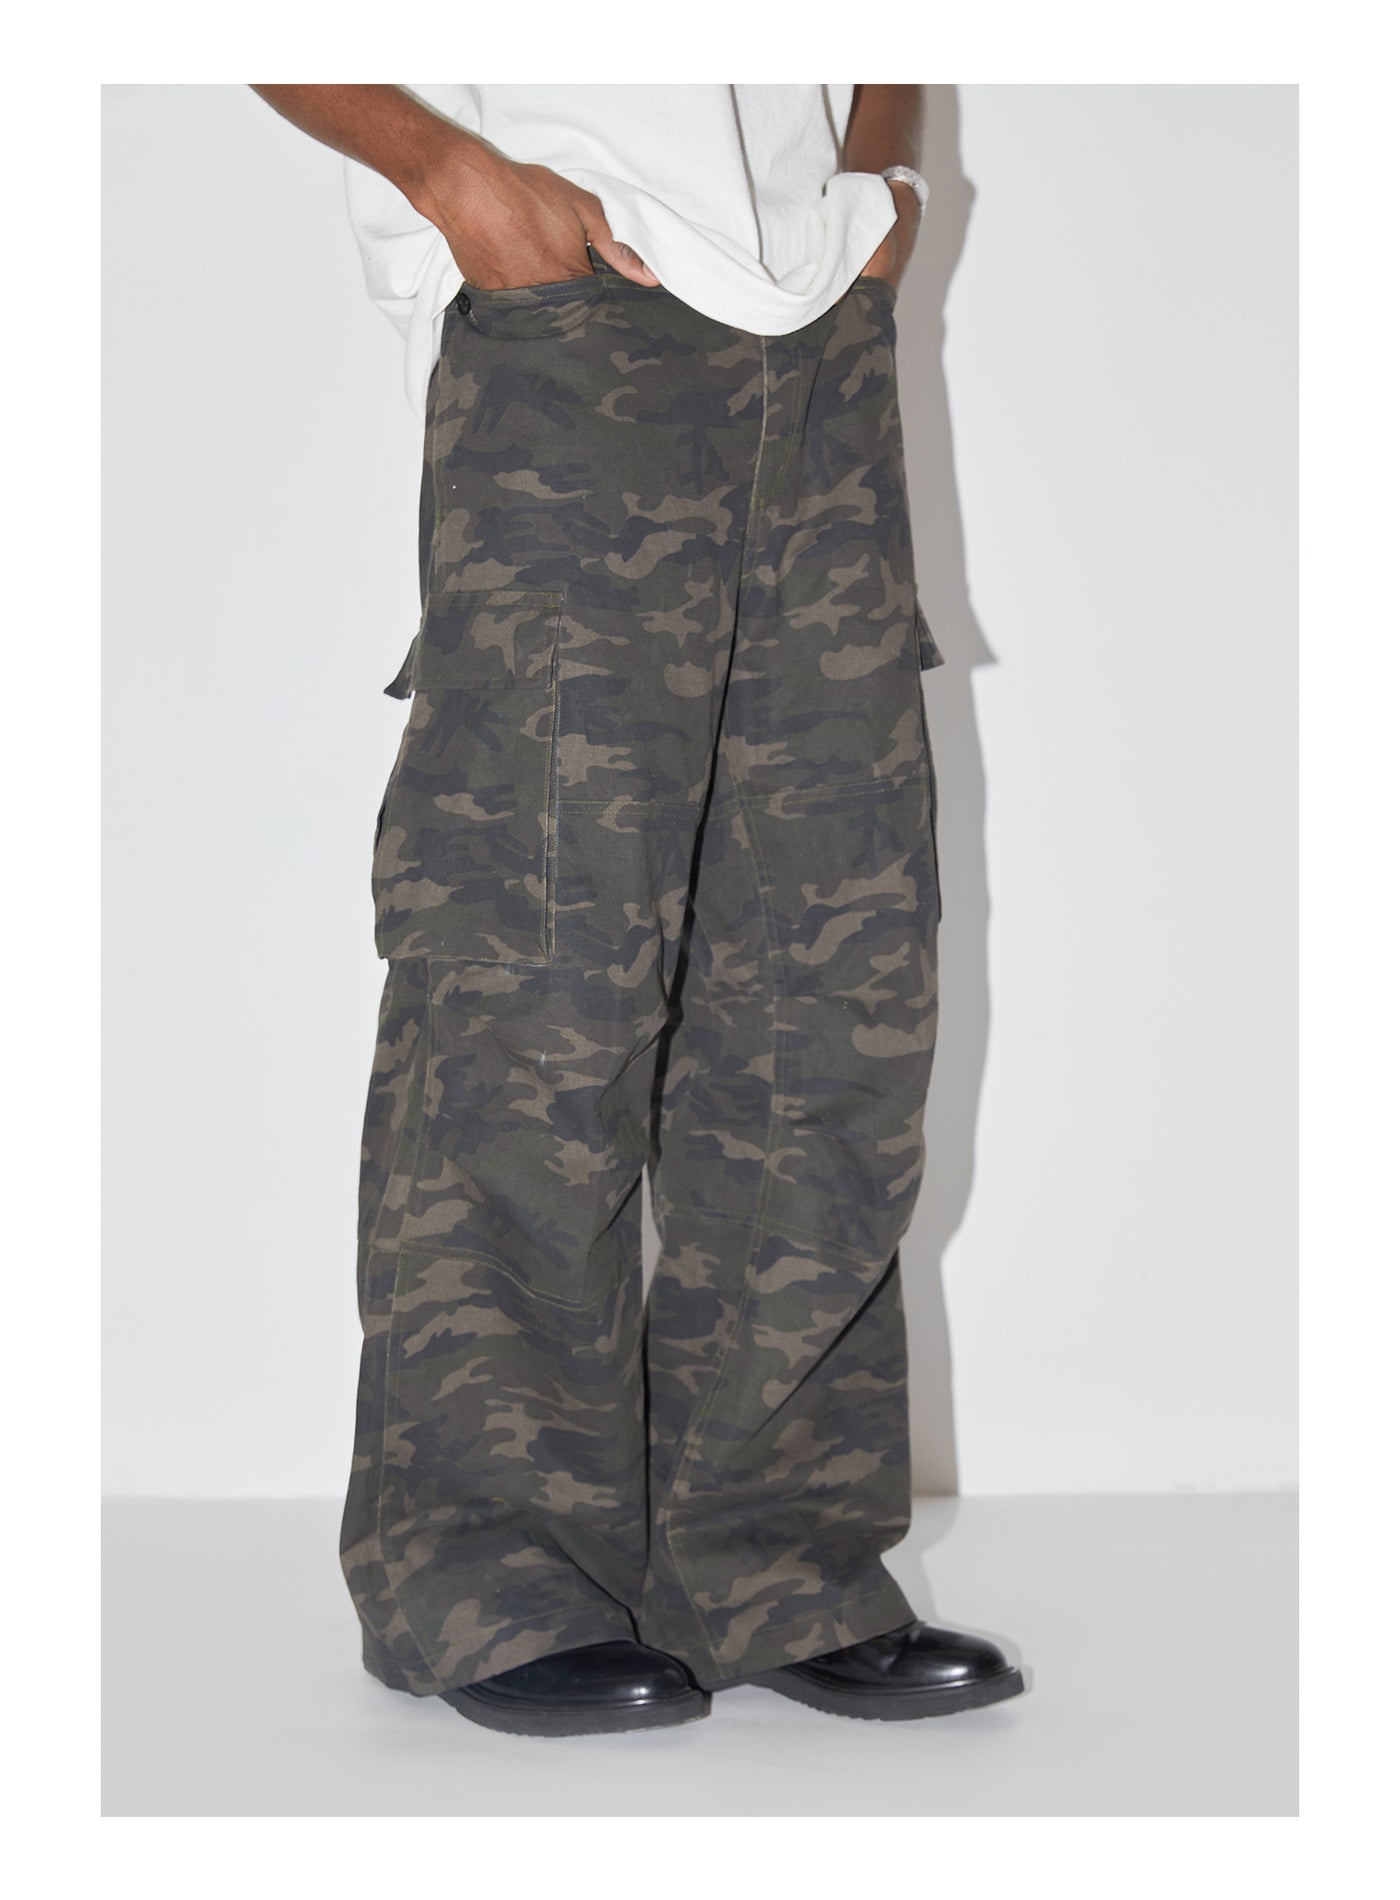 EMPTY REFERENCE Camouflage Embroidery Work Pants